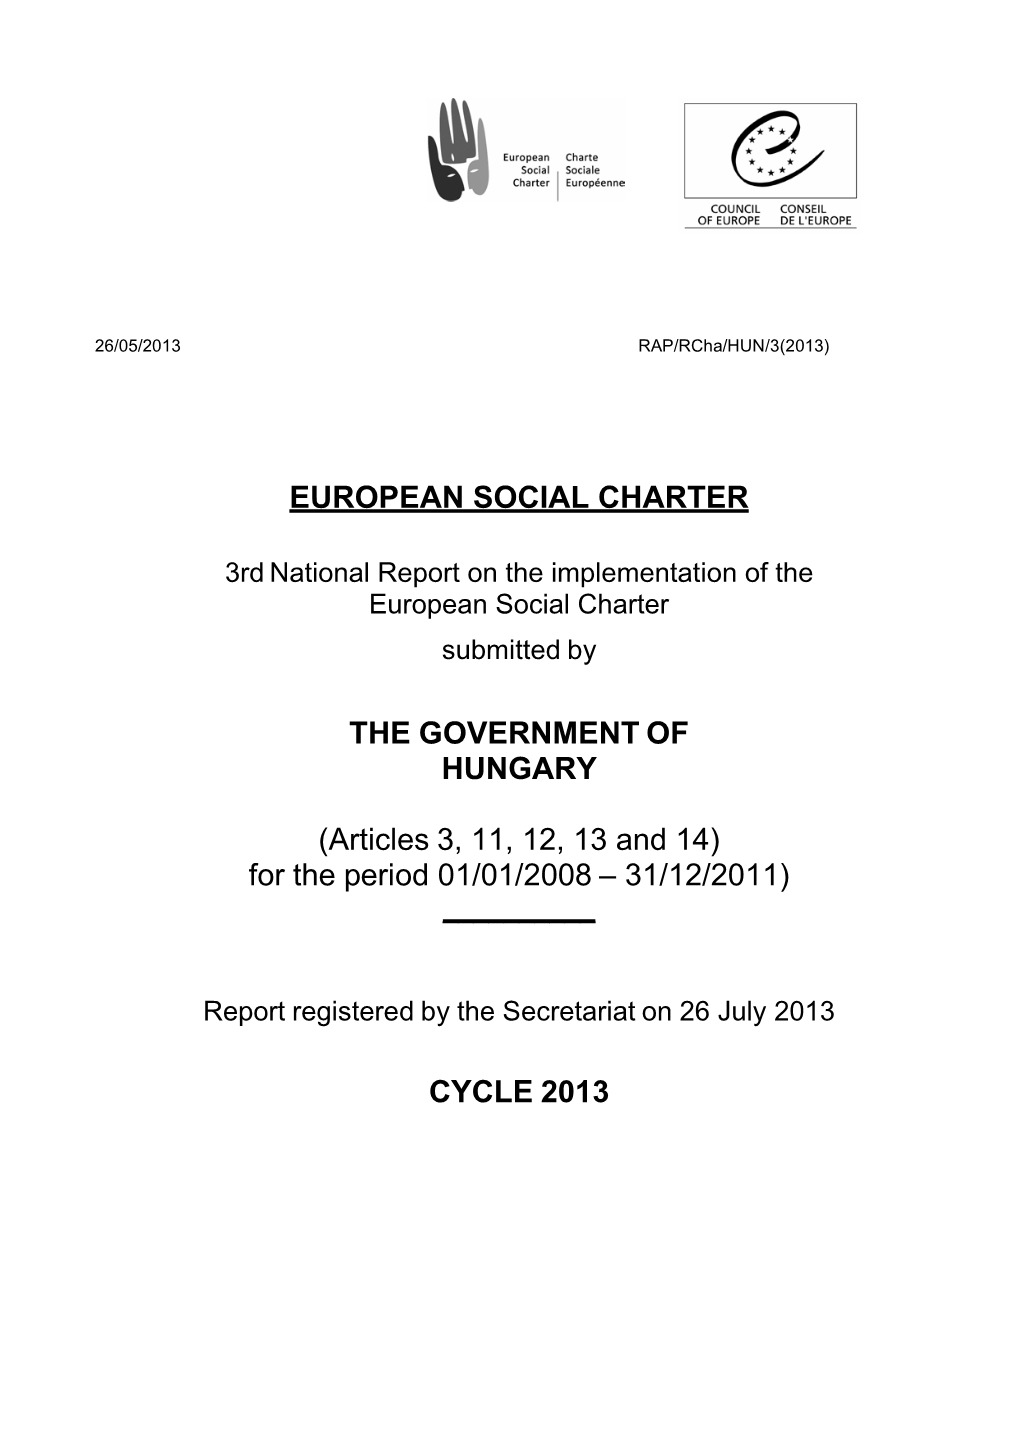 European Social Charter the Government of Hungary